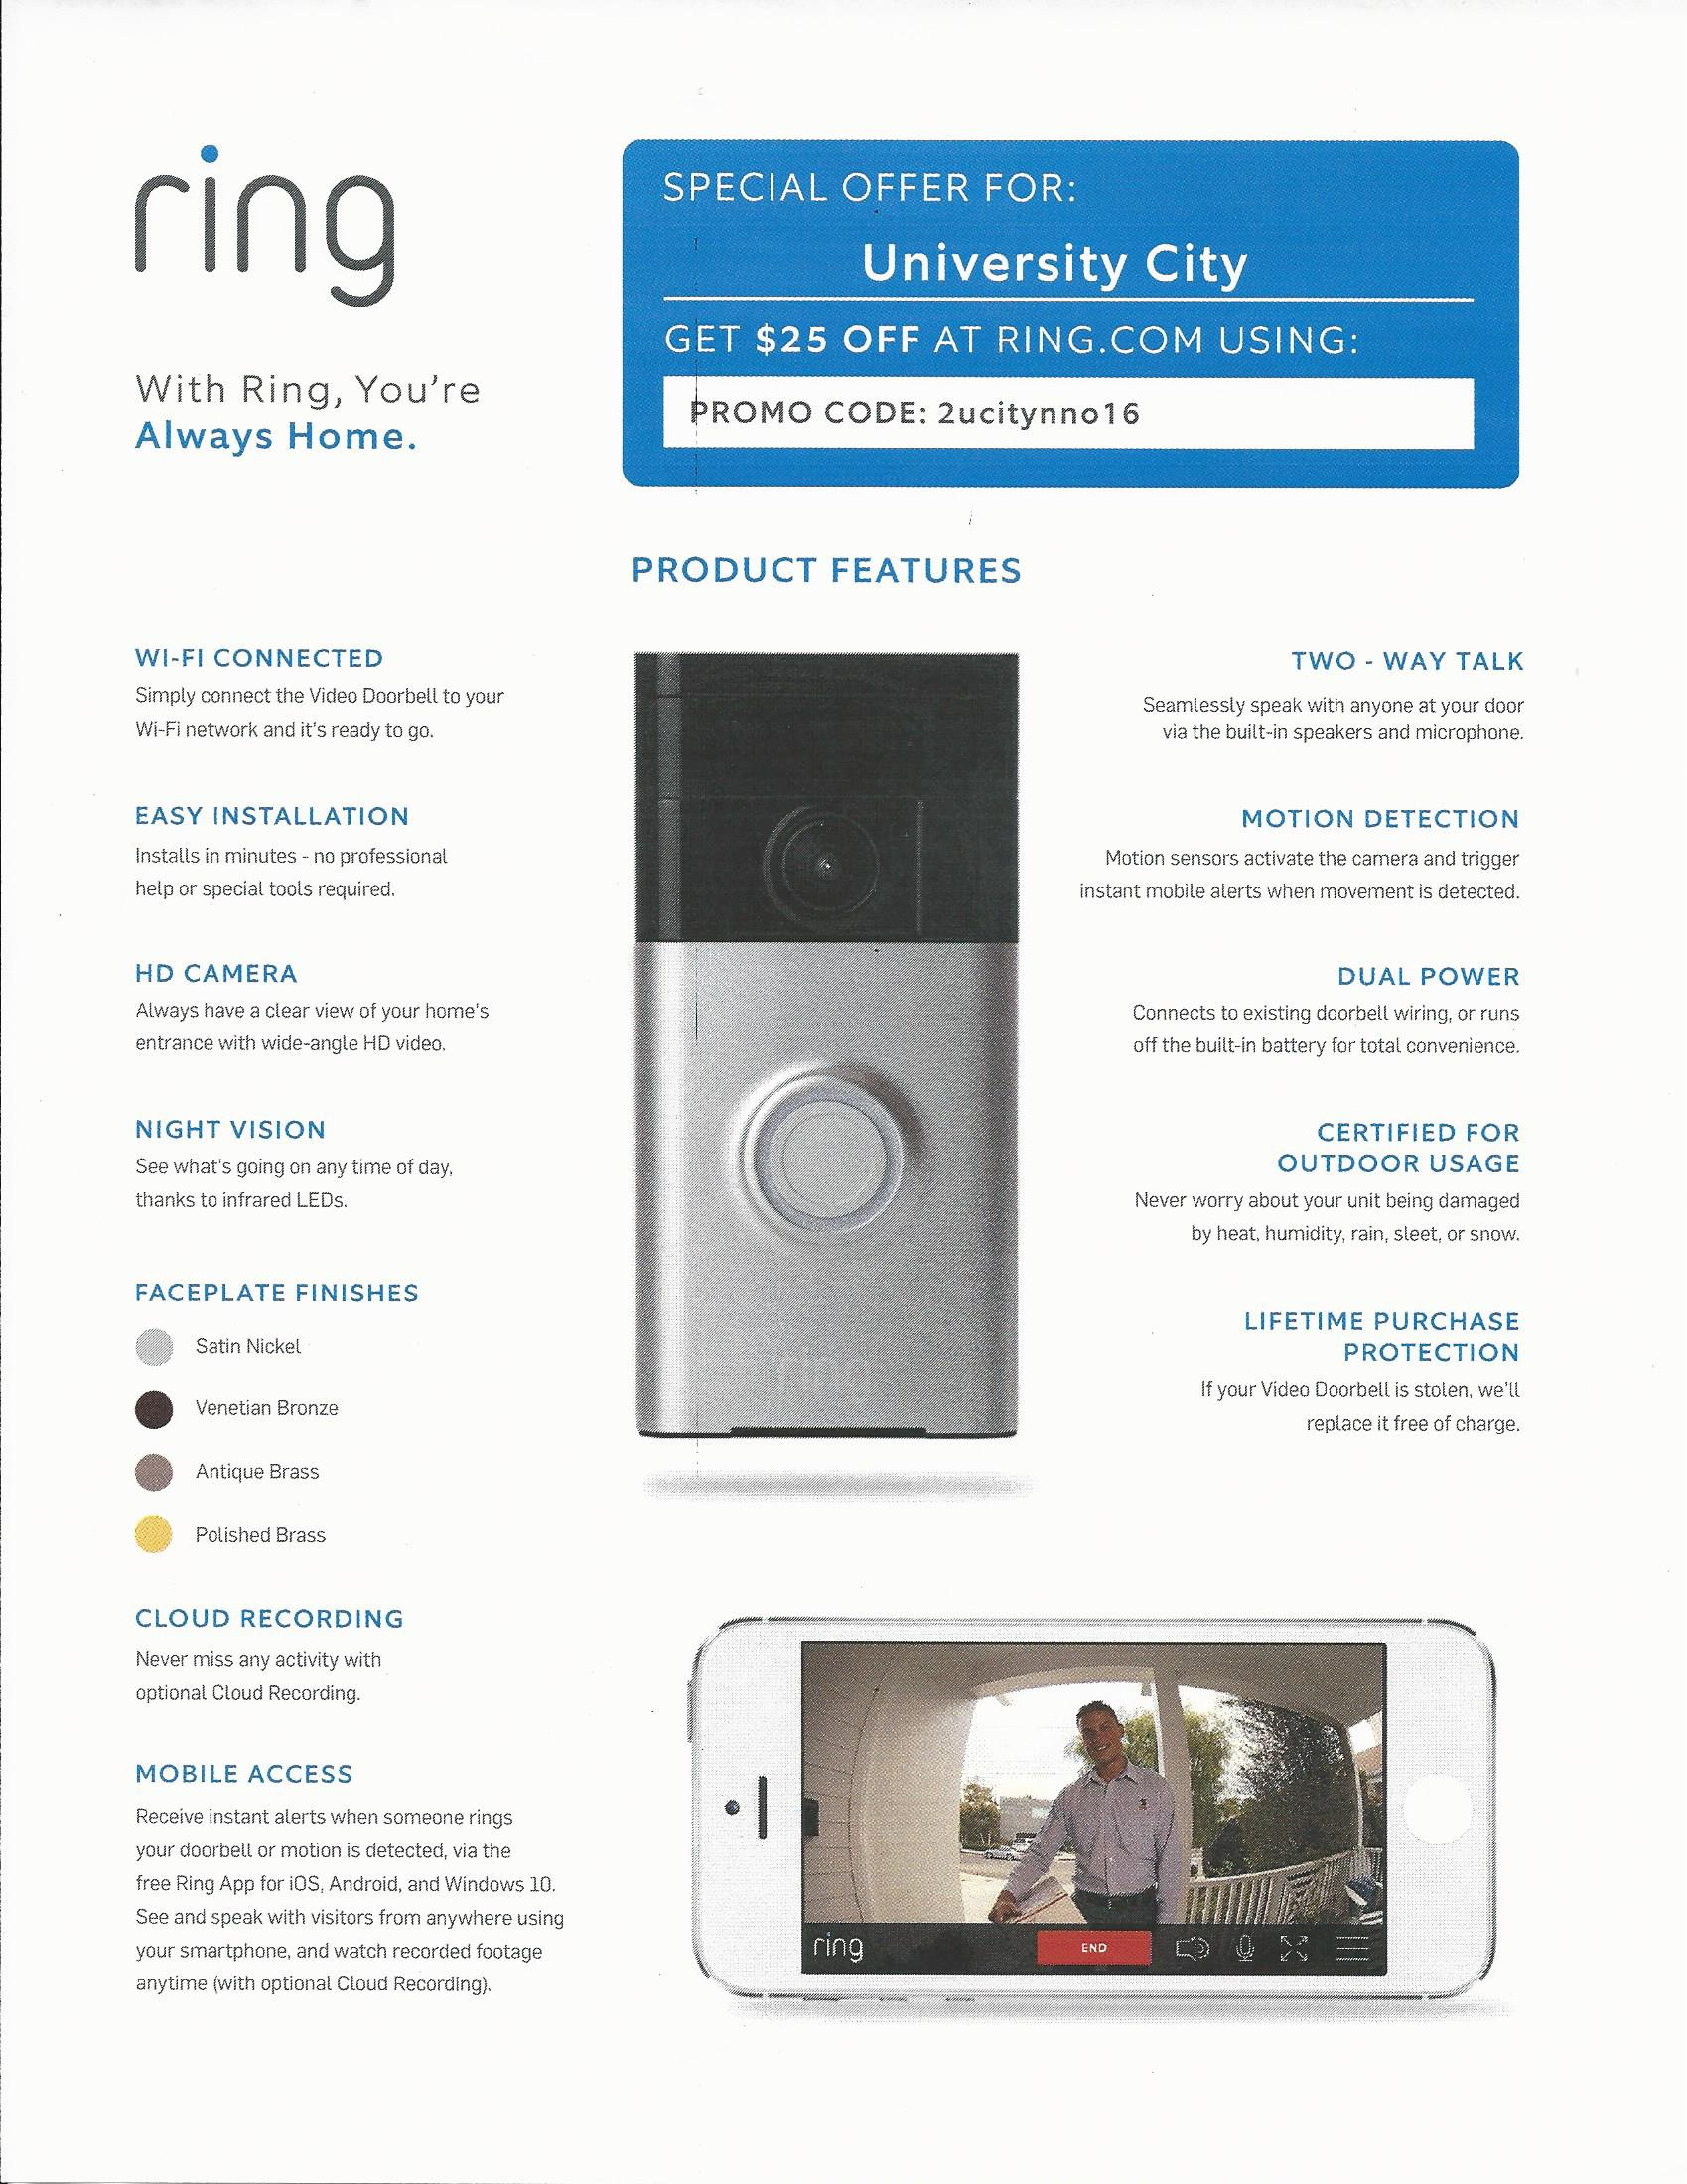 Fighting crime or invading privacy? Police deals with Ring video doorbell  have advocates and critics